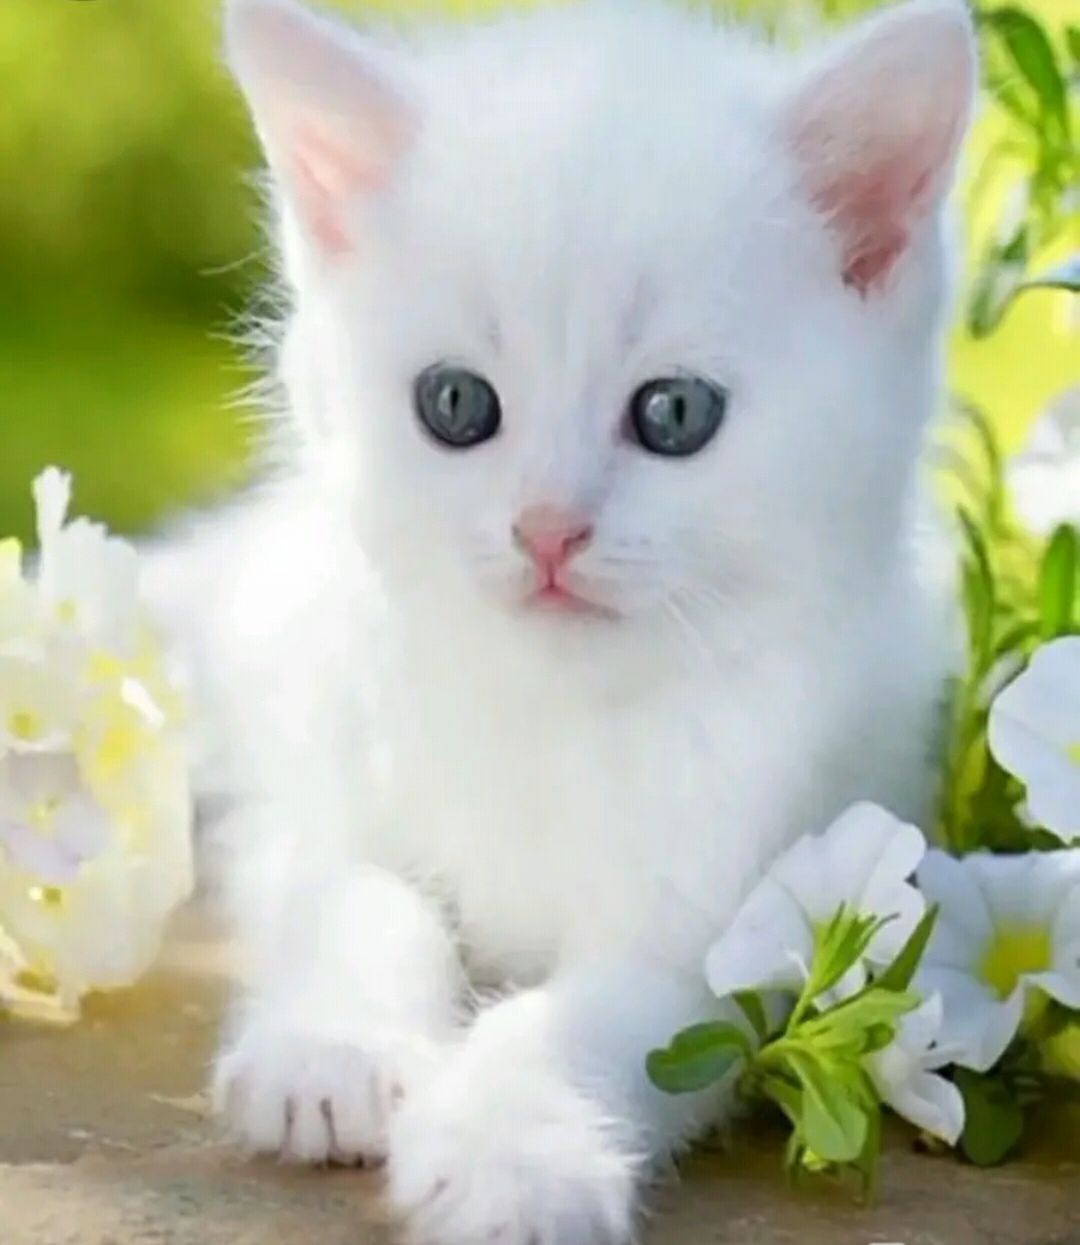 cute cat images • ShareChat Photos and Videos